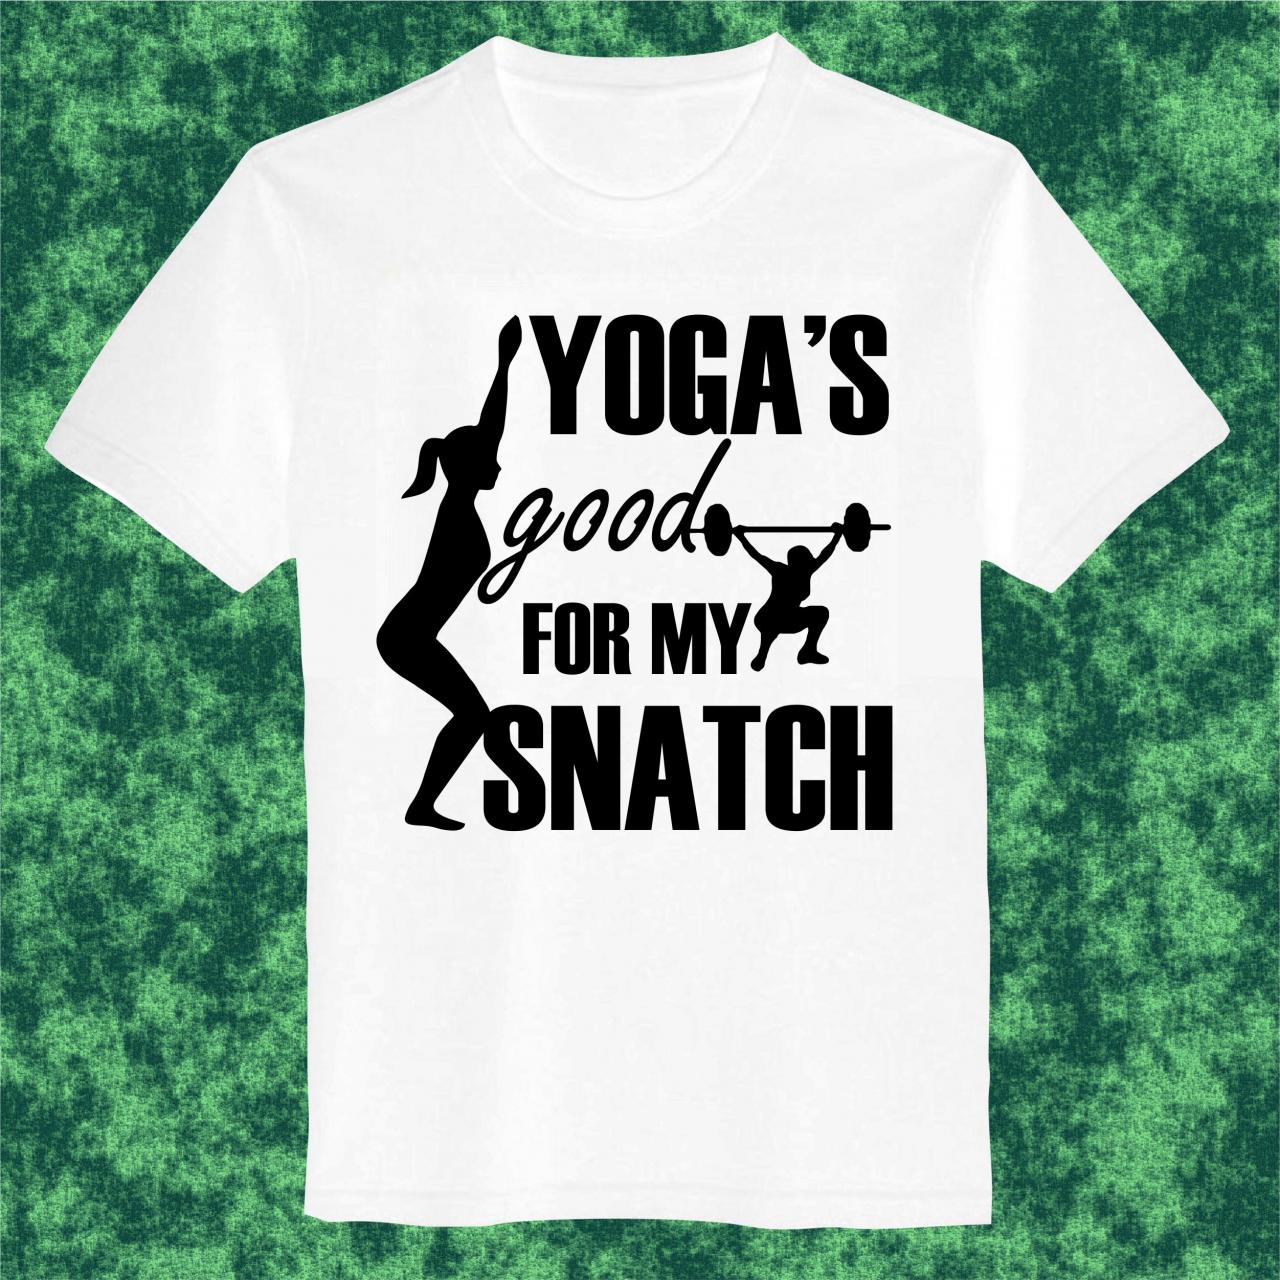 Yoga's Good For My Snatch T-shirt Mens And Womens Cotton Screenprint Size S - 3xl